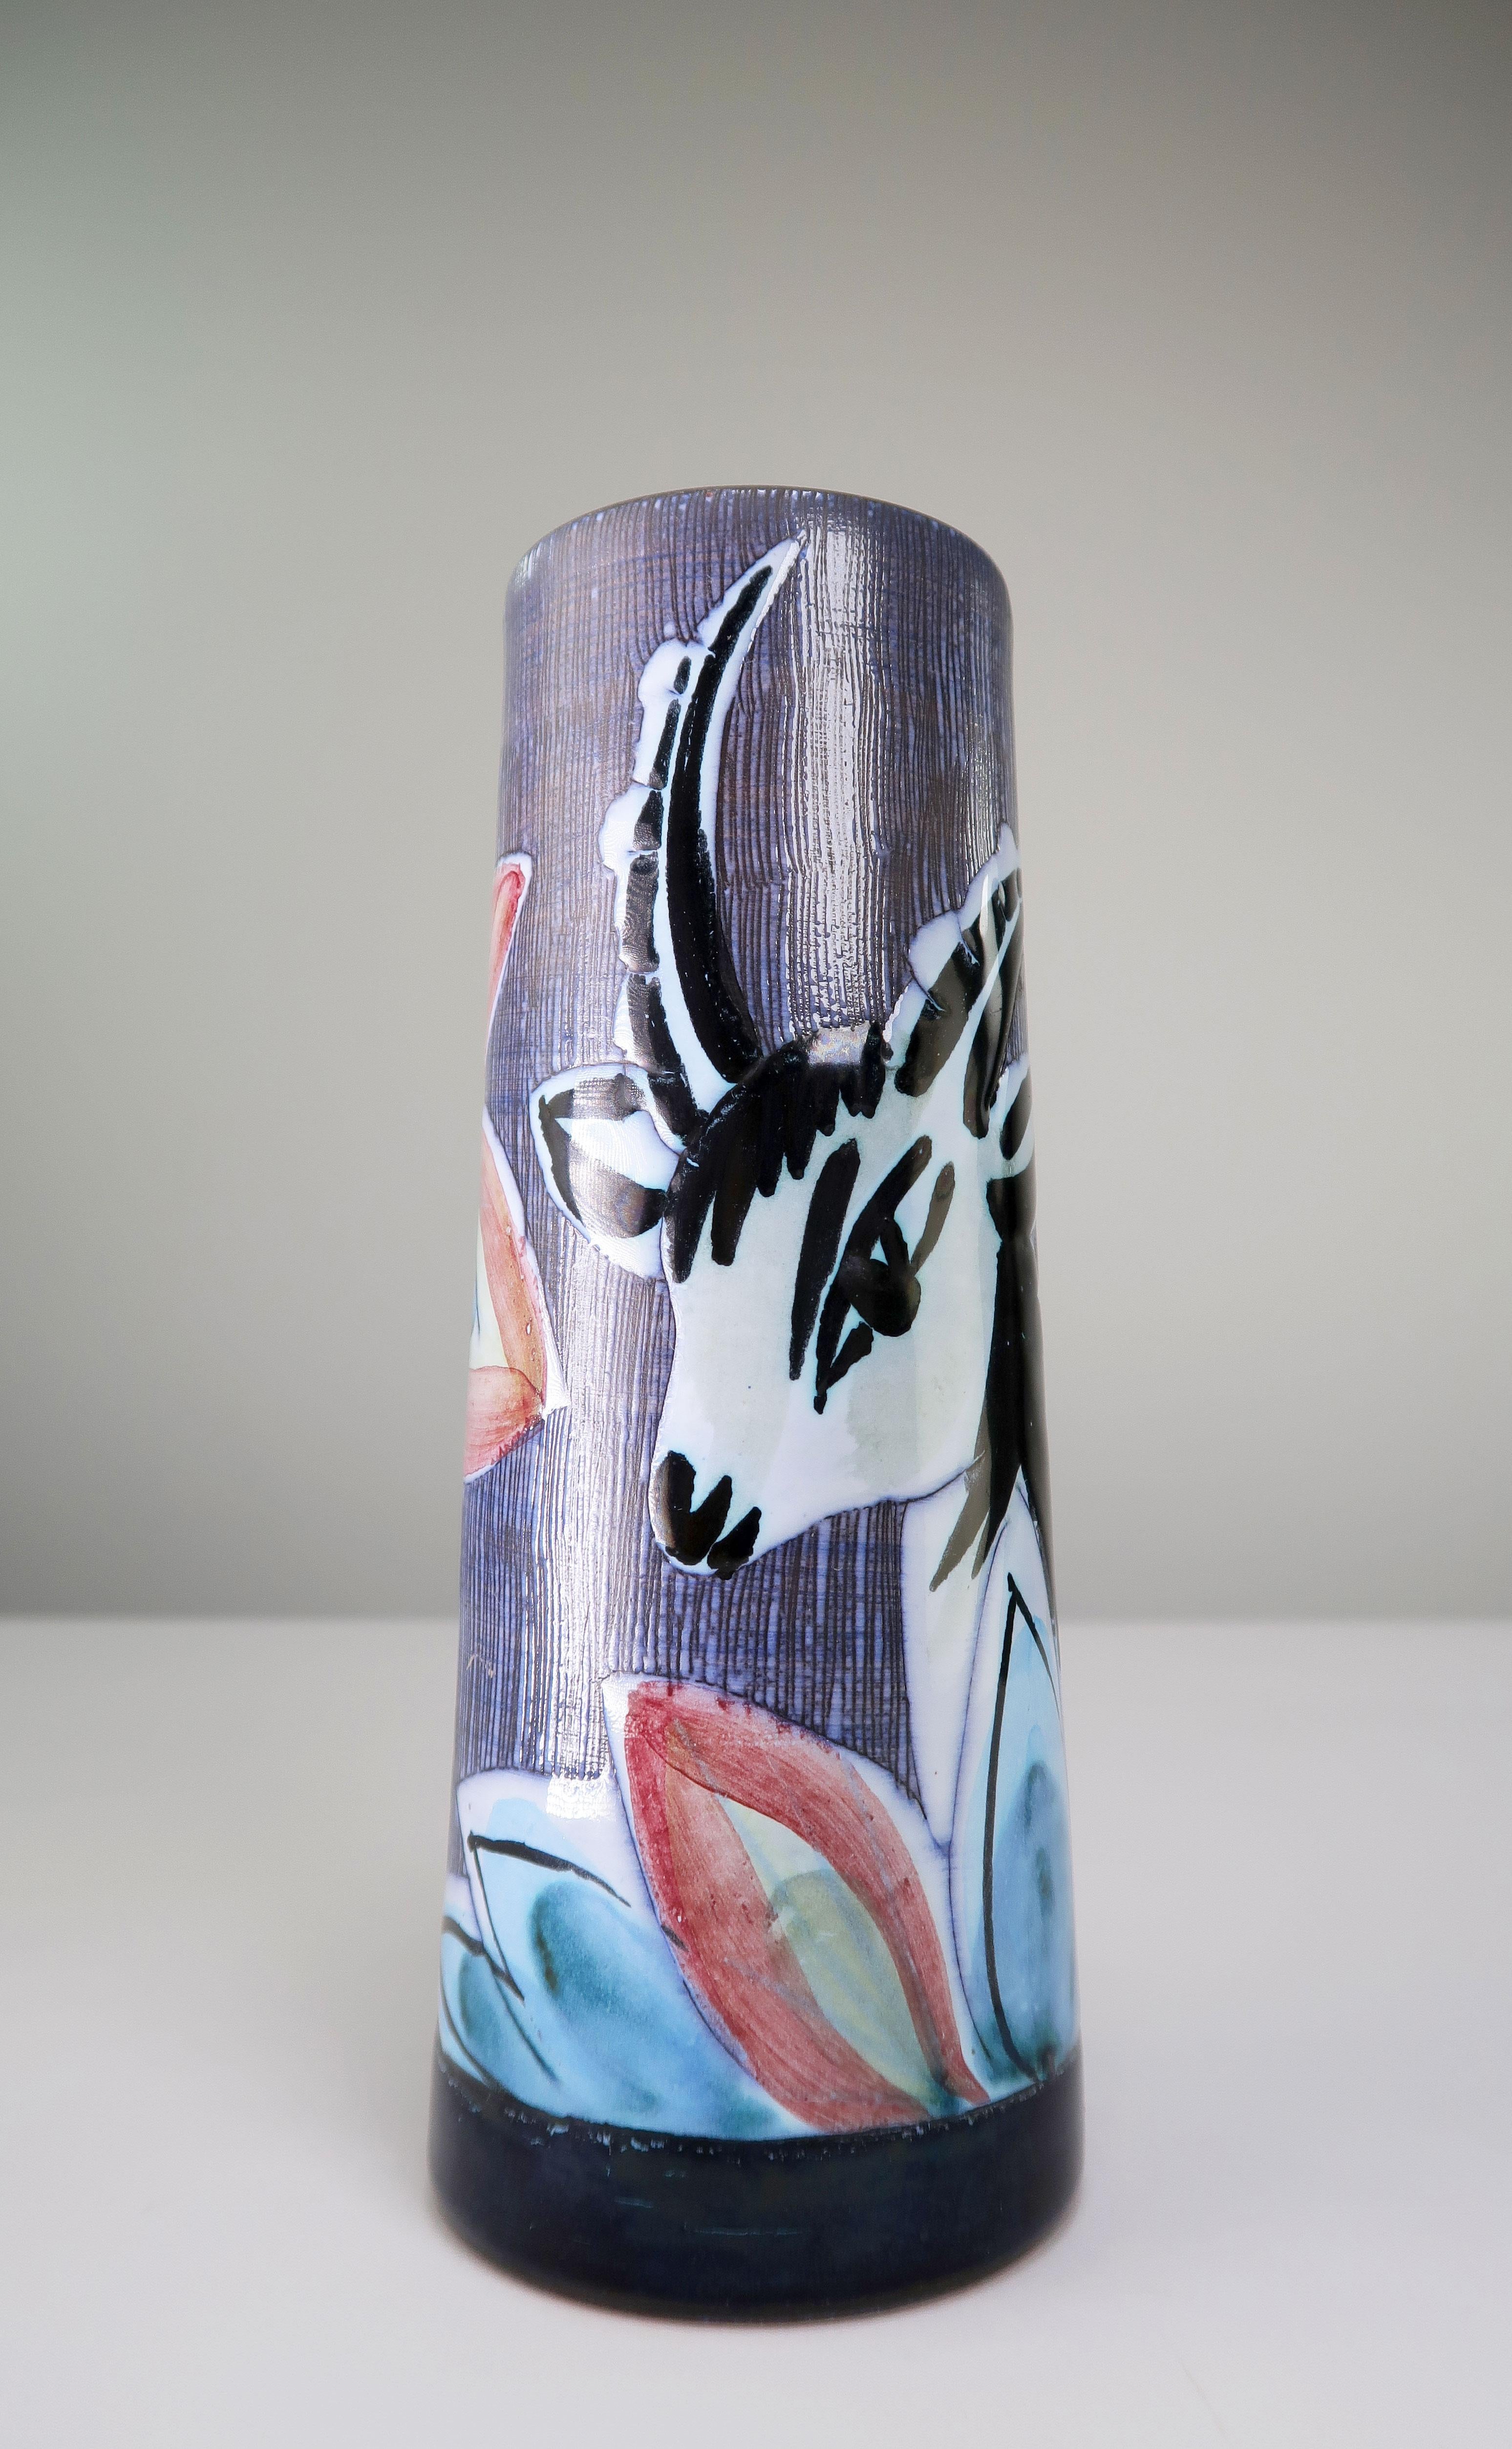 Hand-painted Swedish midcentury modern cylinder vase depicting the head of a black and white gazelle in wild growing flowers in blue, rose, green and yellow colors. Sgraffito technique on the background of the image. White glaze on the inside and